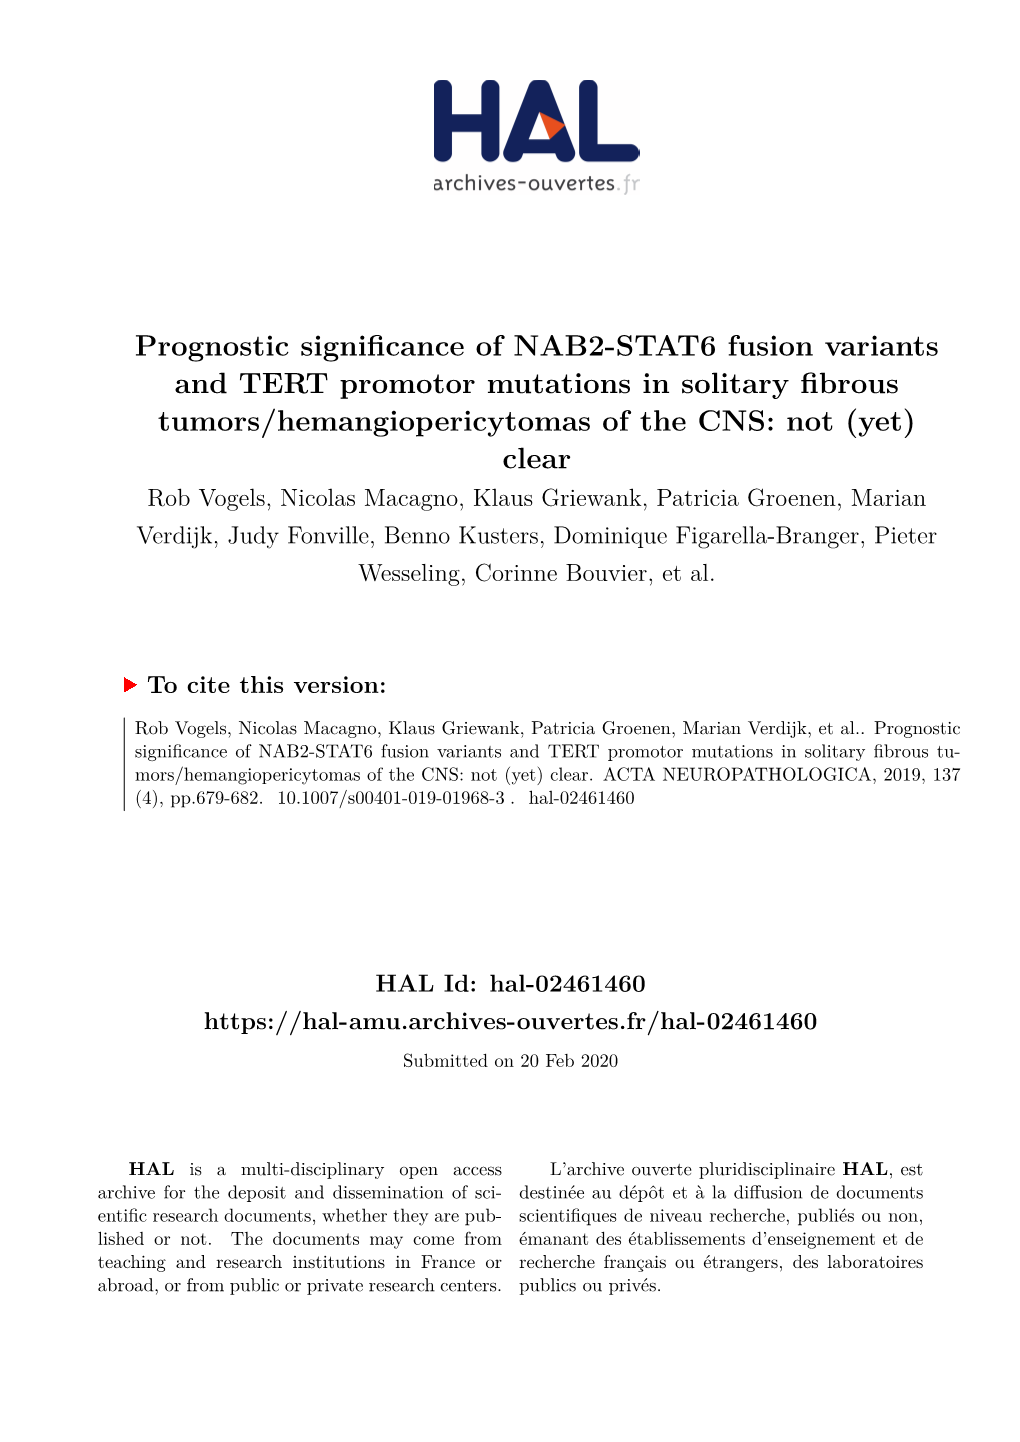 Prognostic Significance of NAB2-STAT6 Fusion Variants And